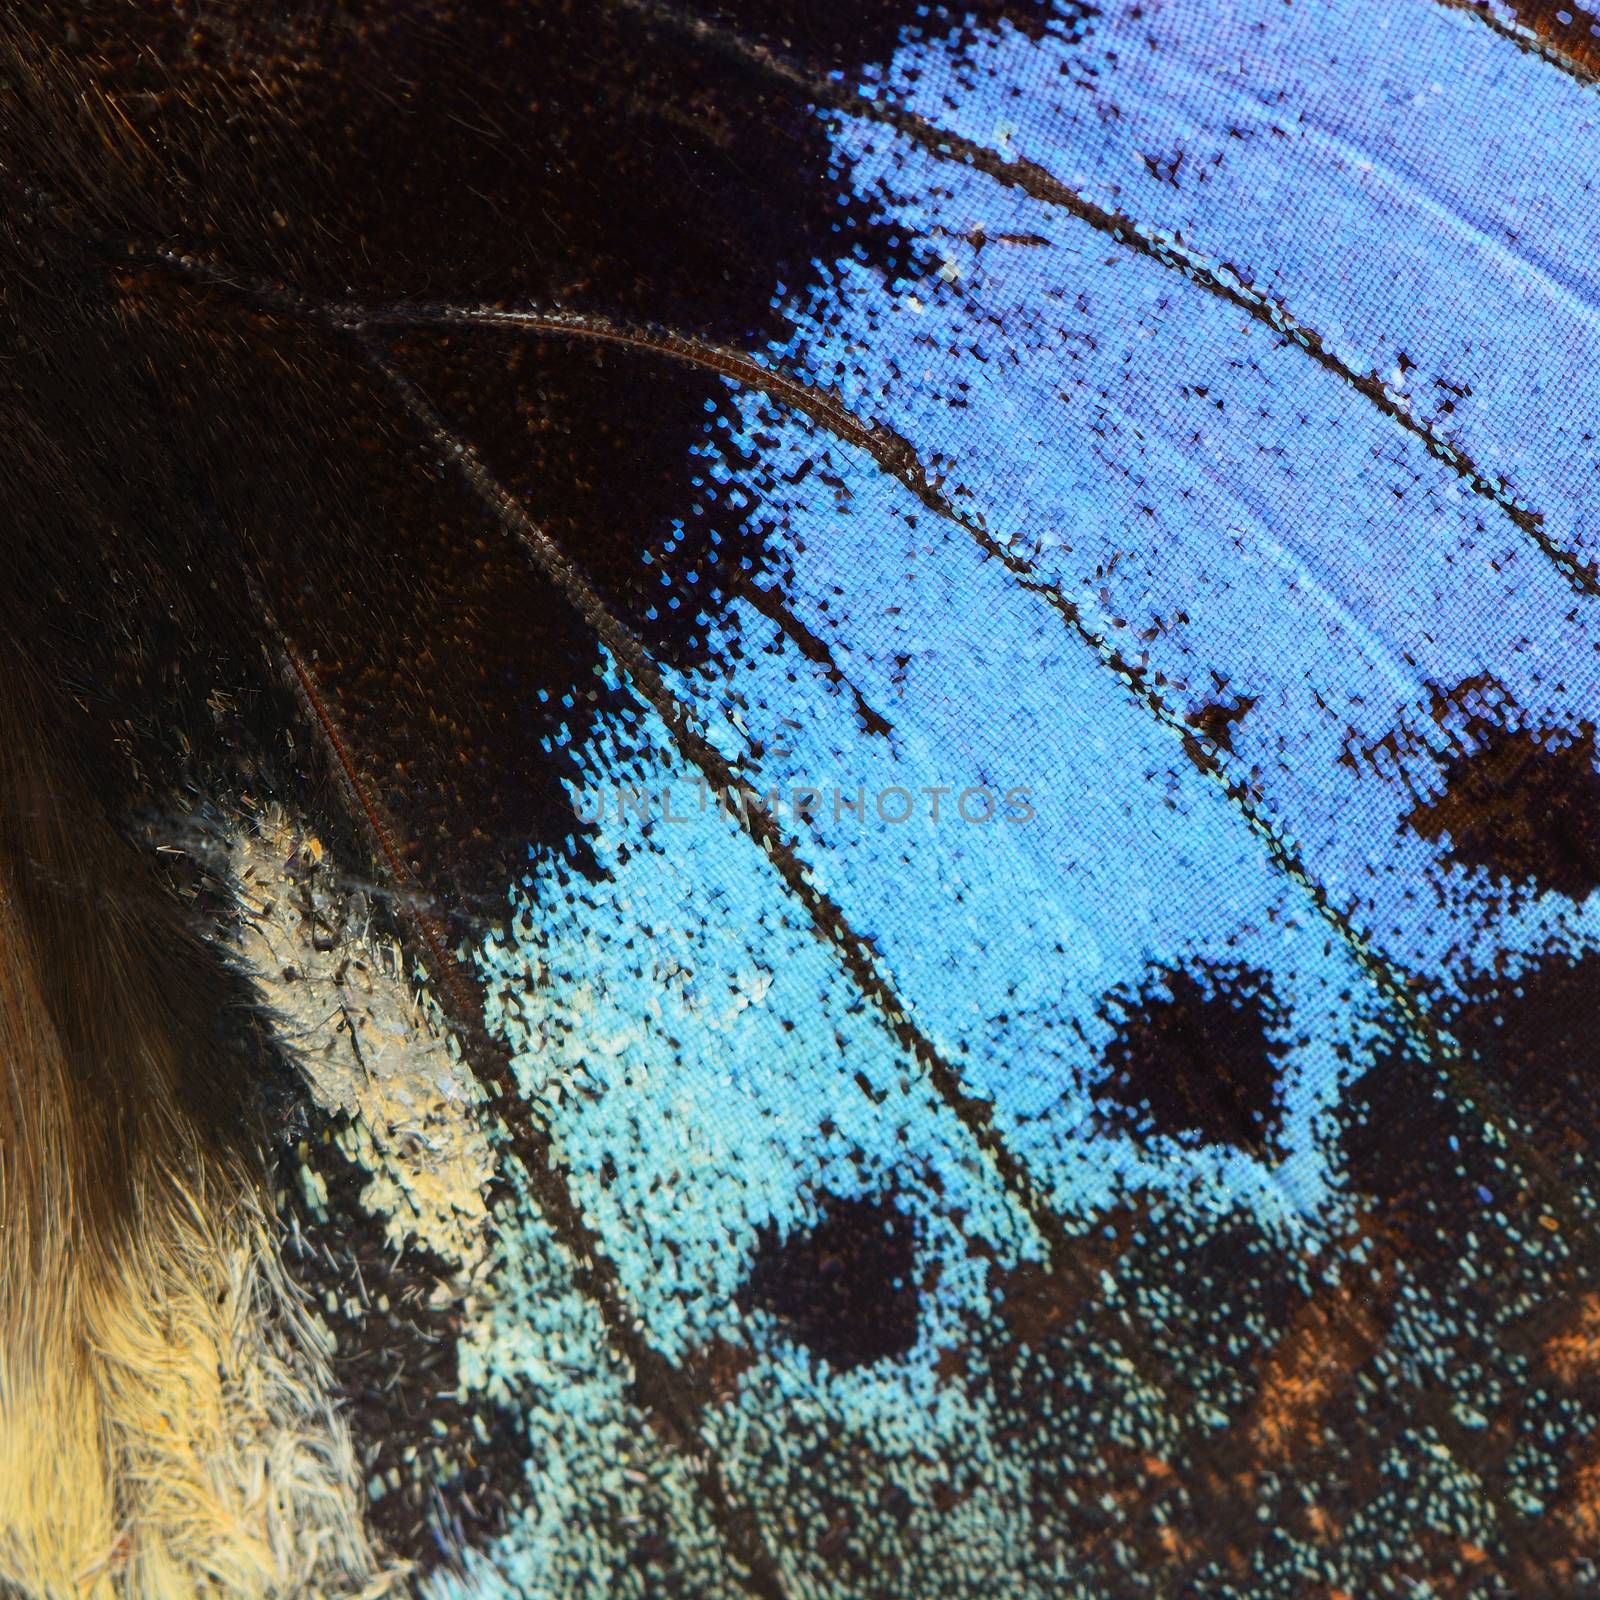 Nature texture, derived from blue butterfly wing background